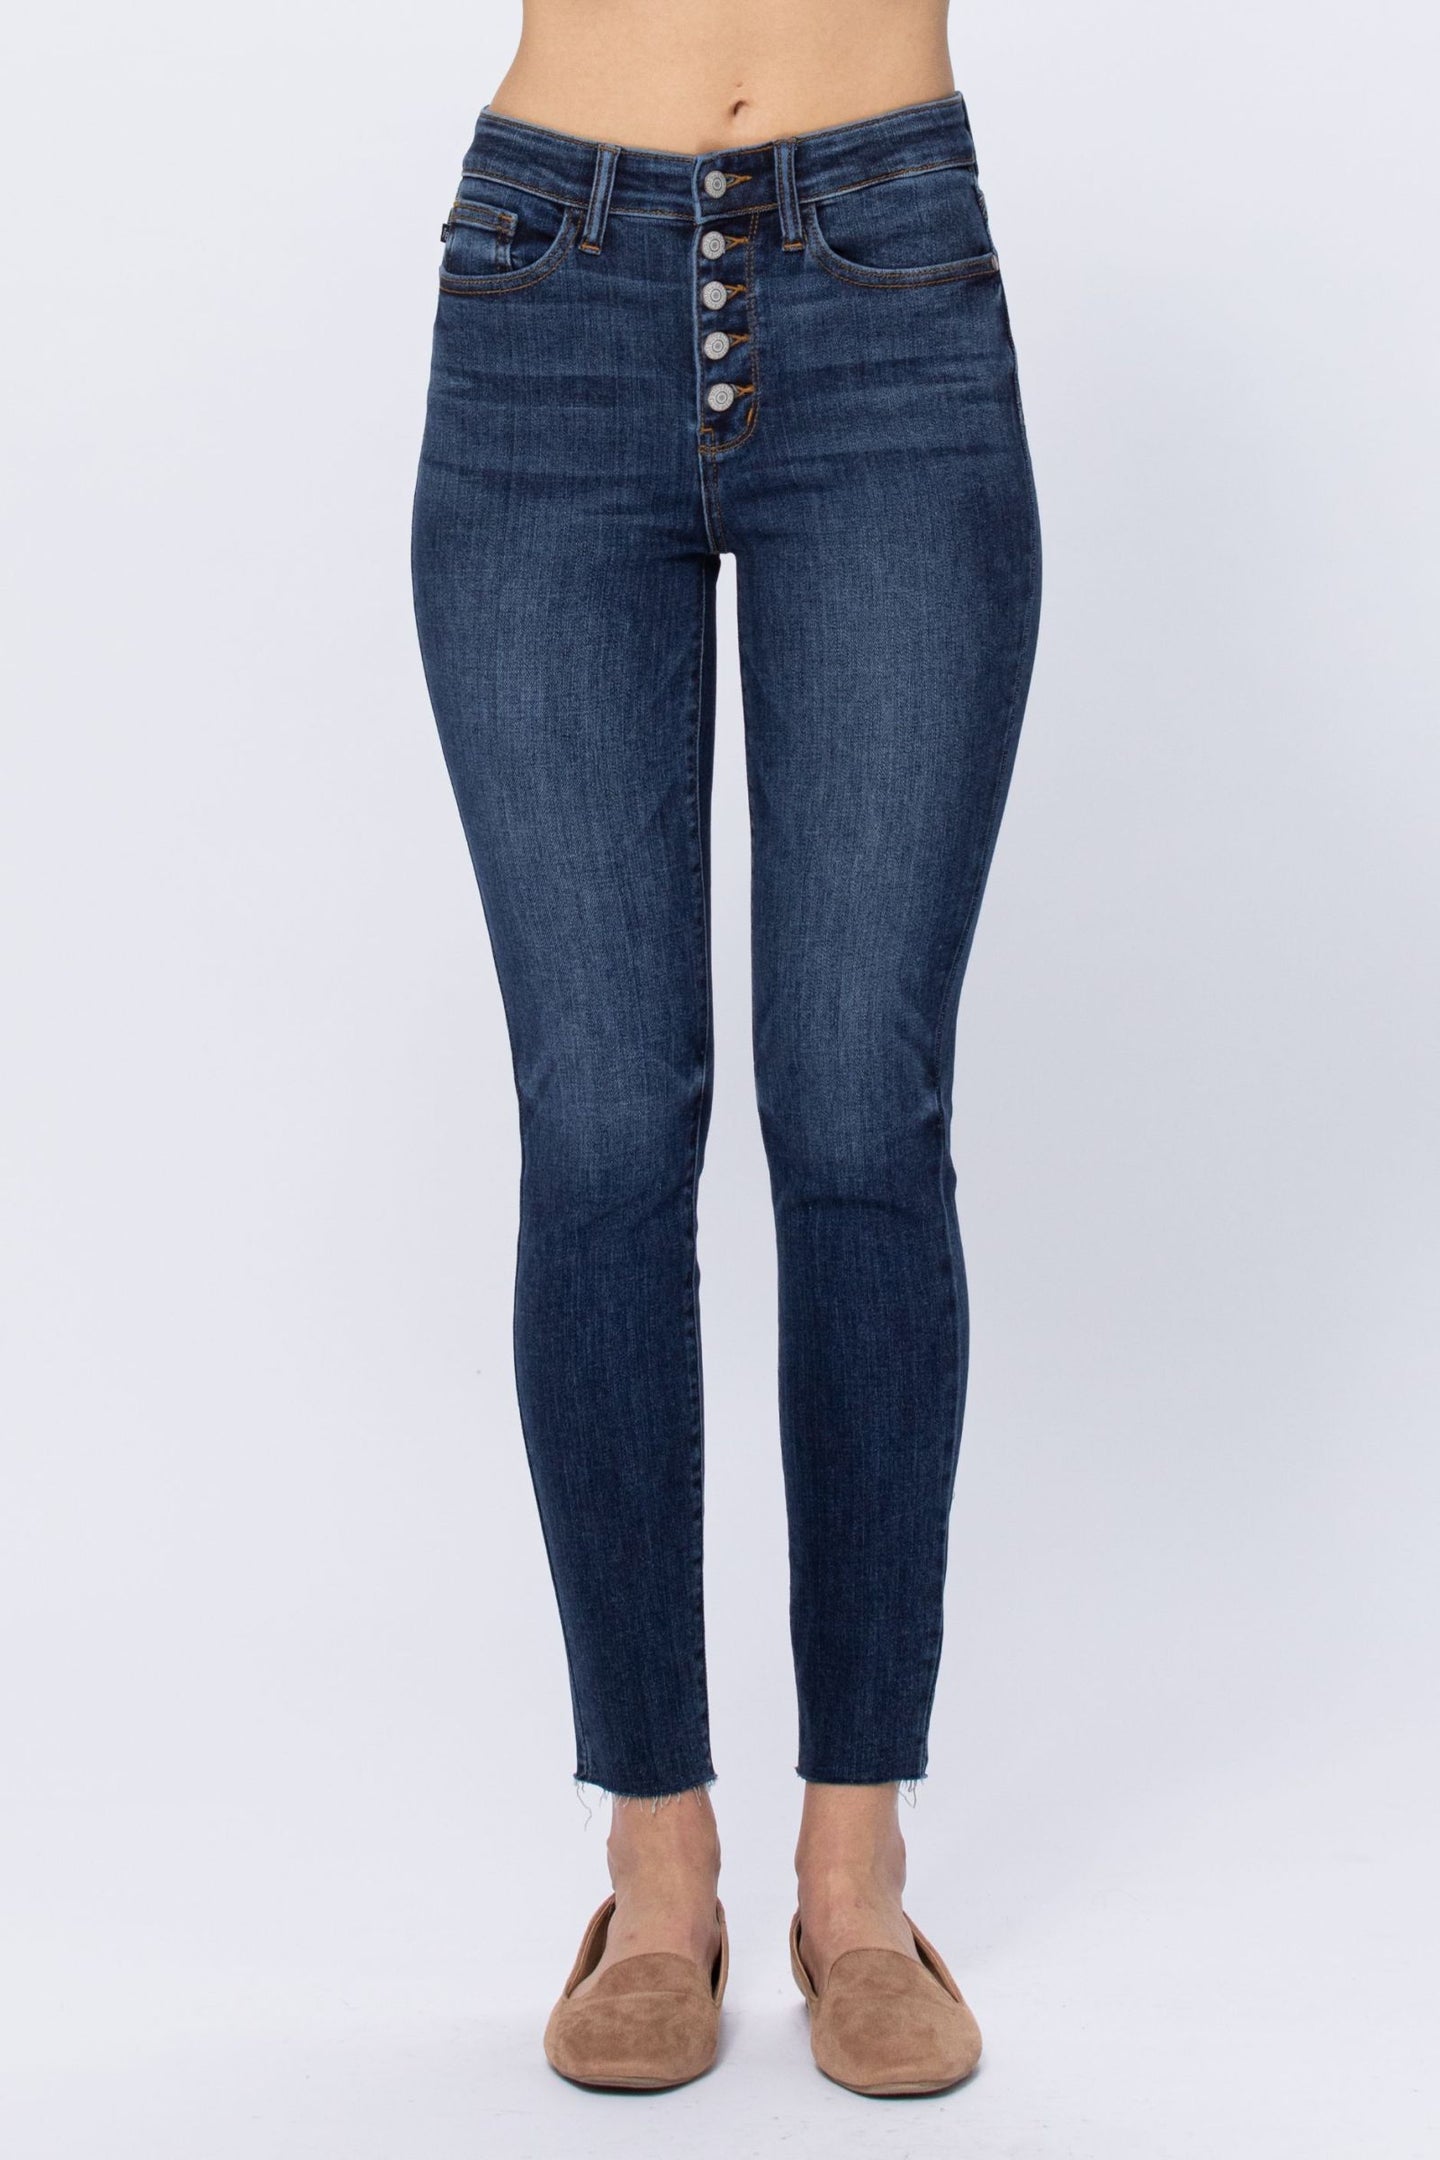 Judy Blue 5 Button Skinny Jeans